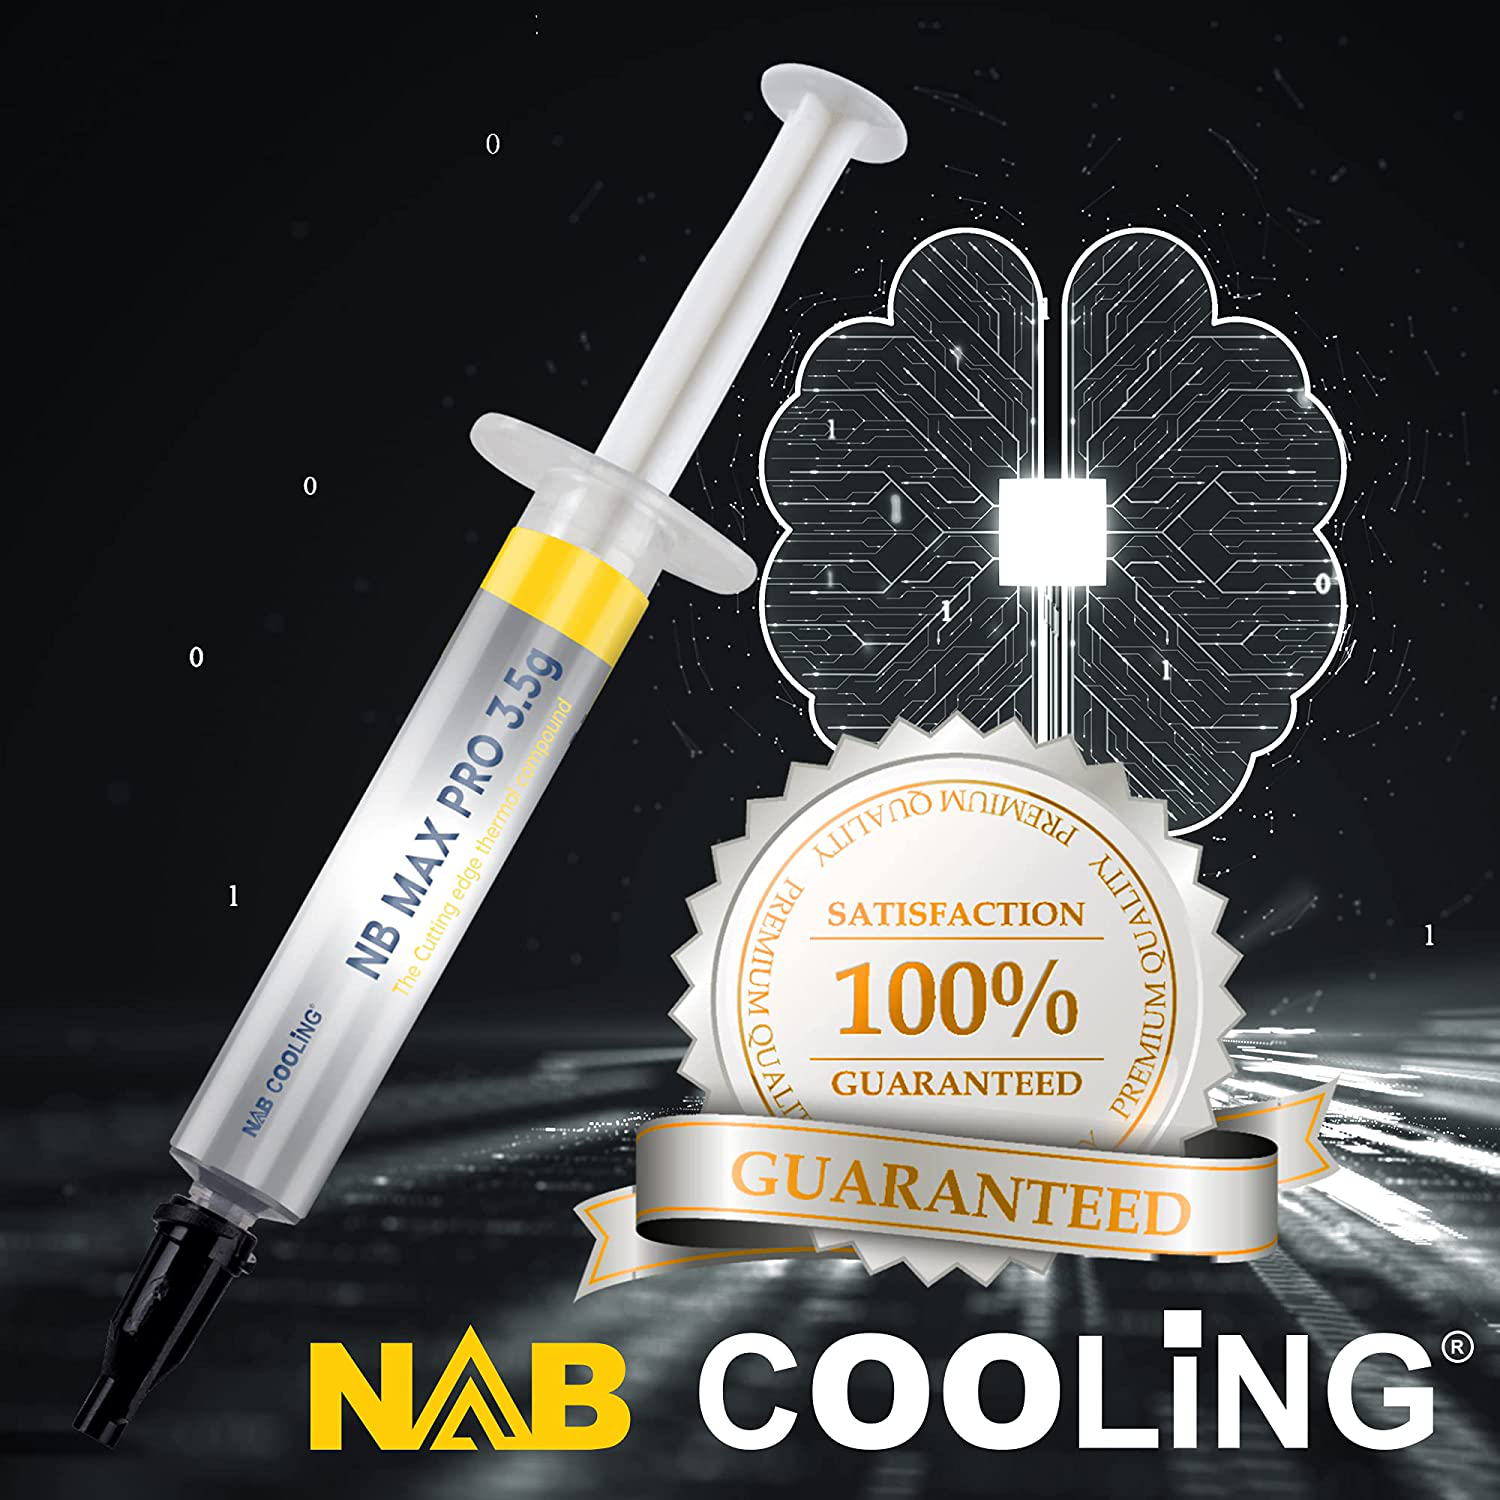 Nab Cooling Thermal Compound Paste for Heatsink 3.5G Maximum Thermal Conductivity, High Density, Easy Application Bonus Spatula, Noncorrosive (3.5G)